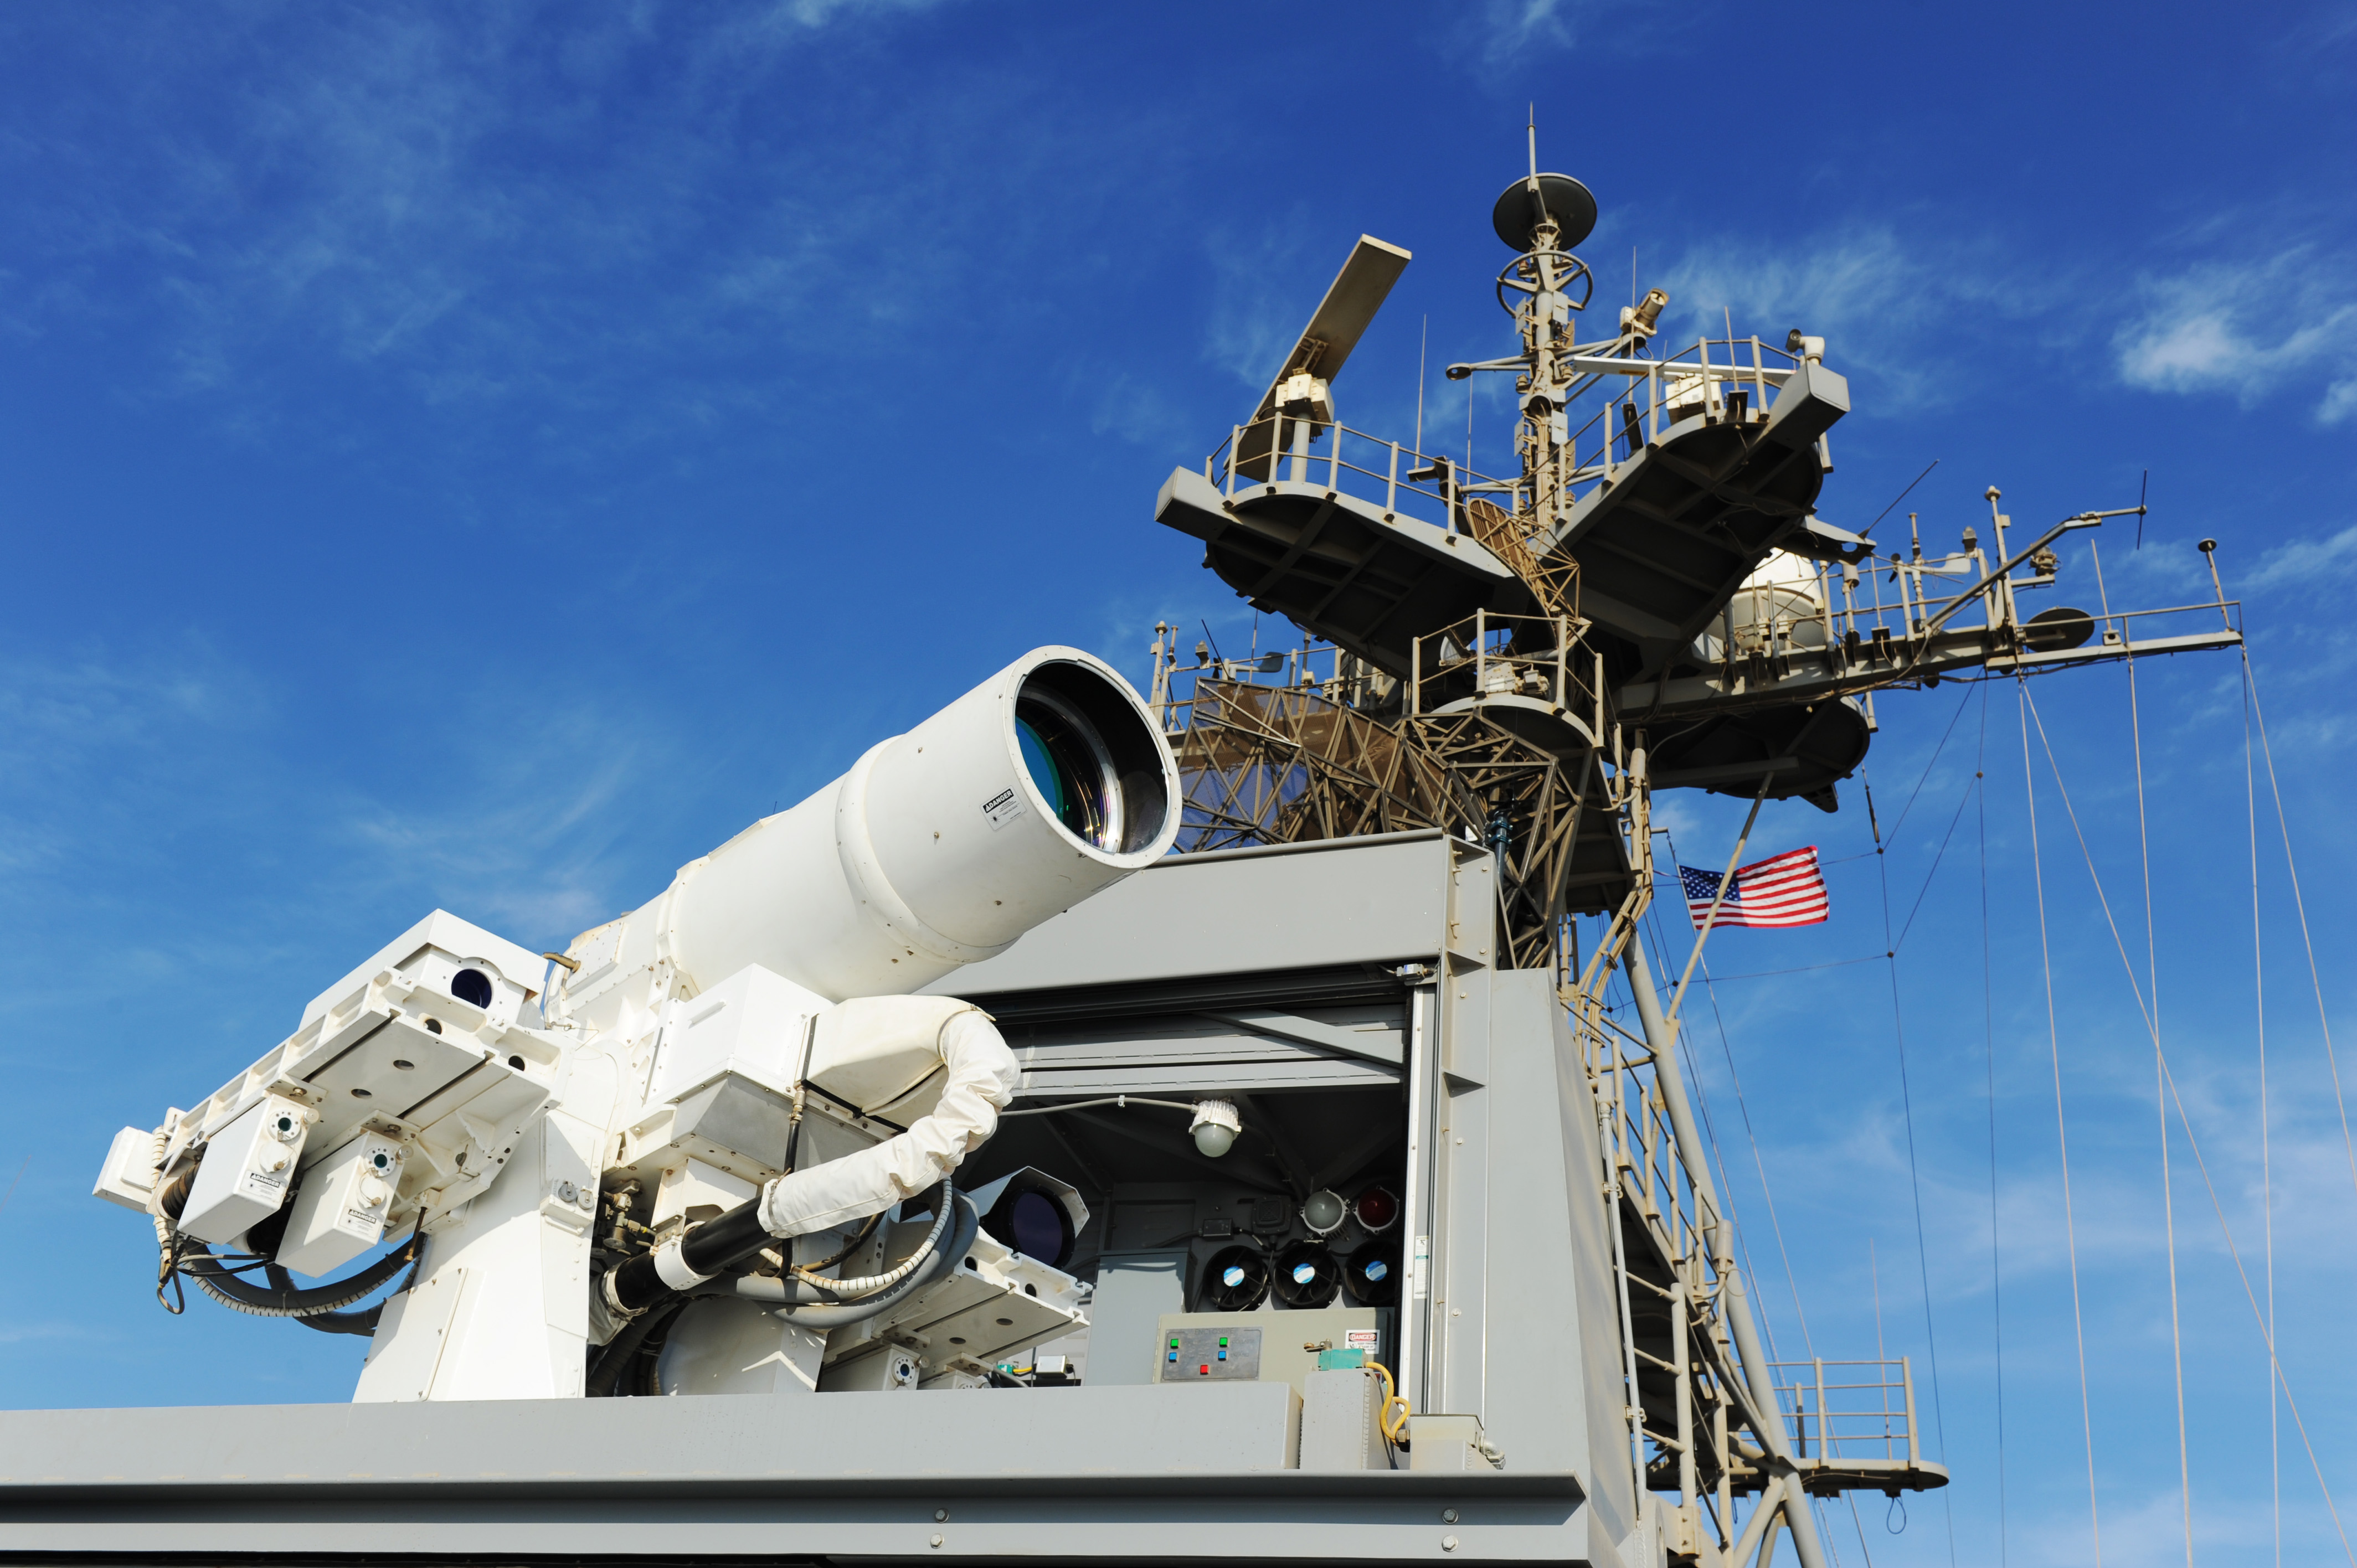 laser-weapon-system-on-uss-ponce.jpg